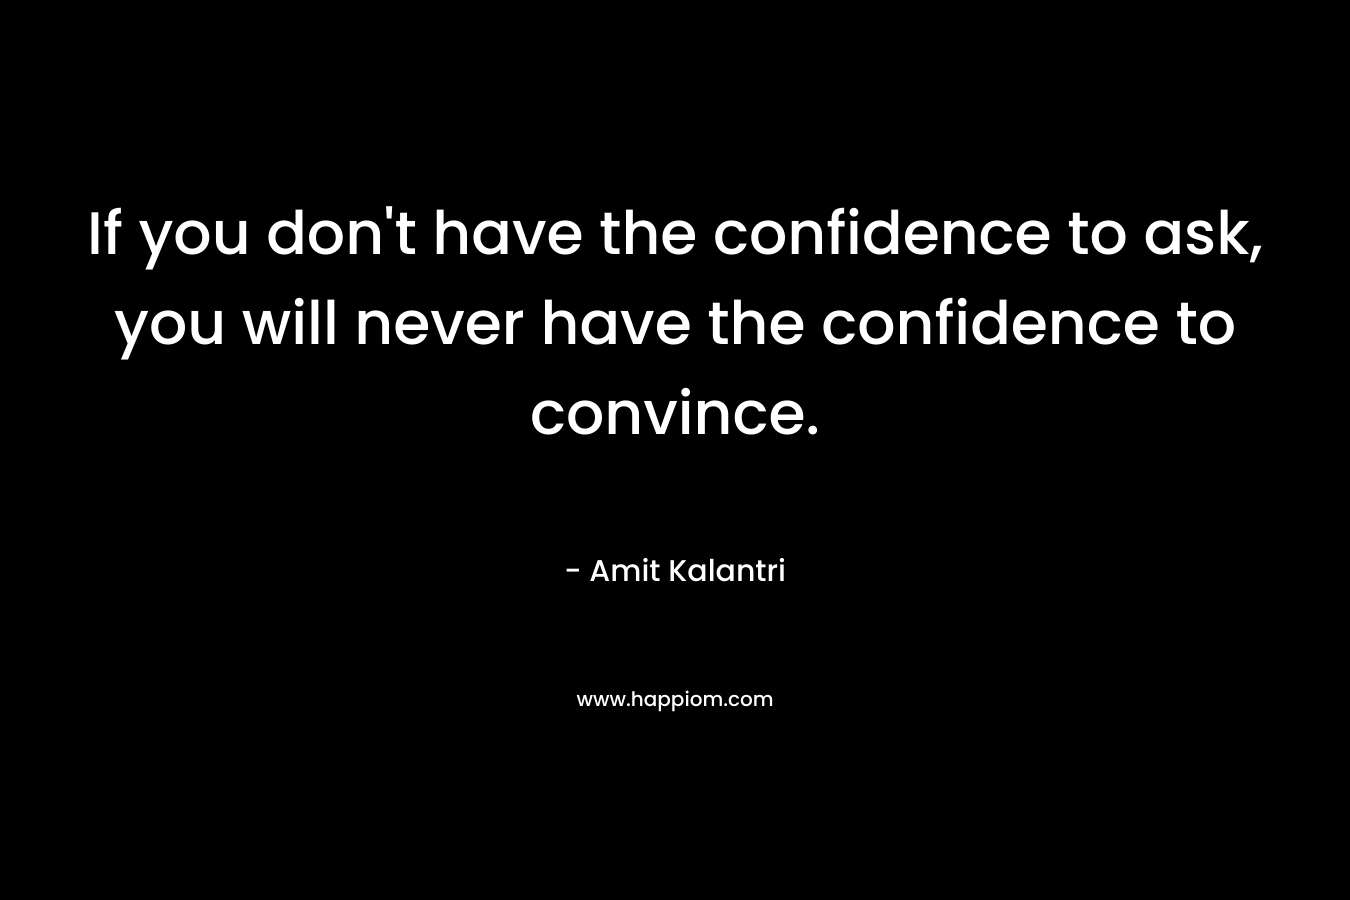 If you don't have the confidence to ask, you will never have the confidence to convince.